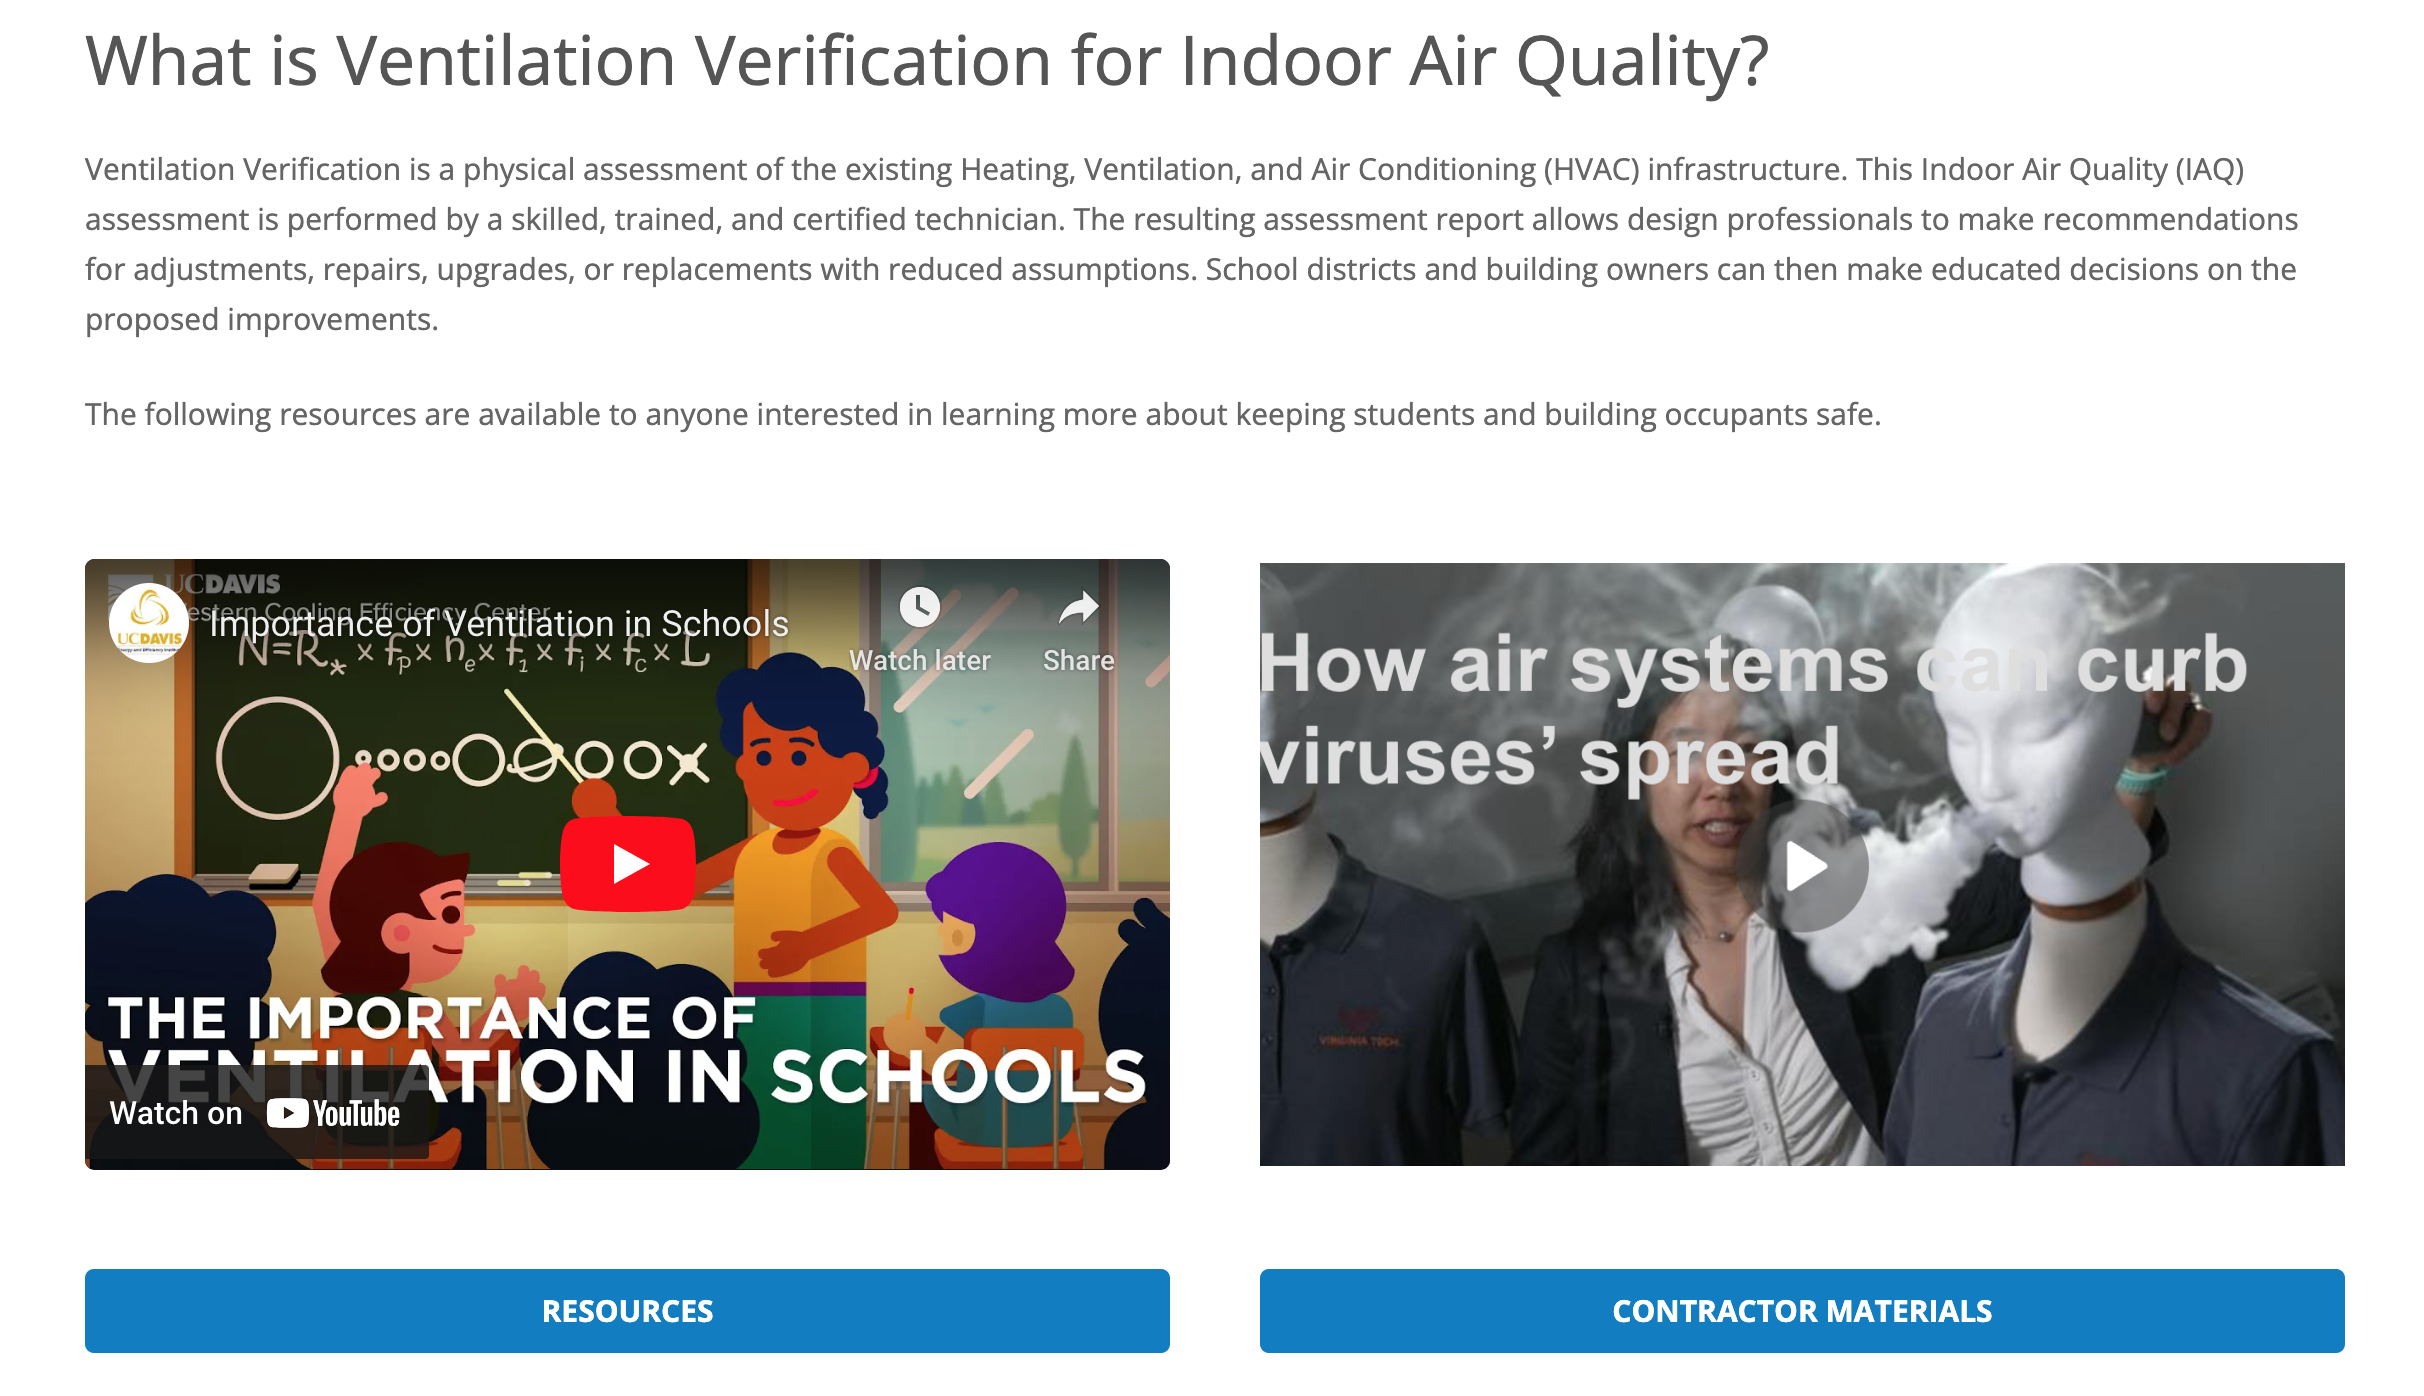 webpage that says "what is ventilation verification for indoor air quality?"